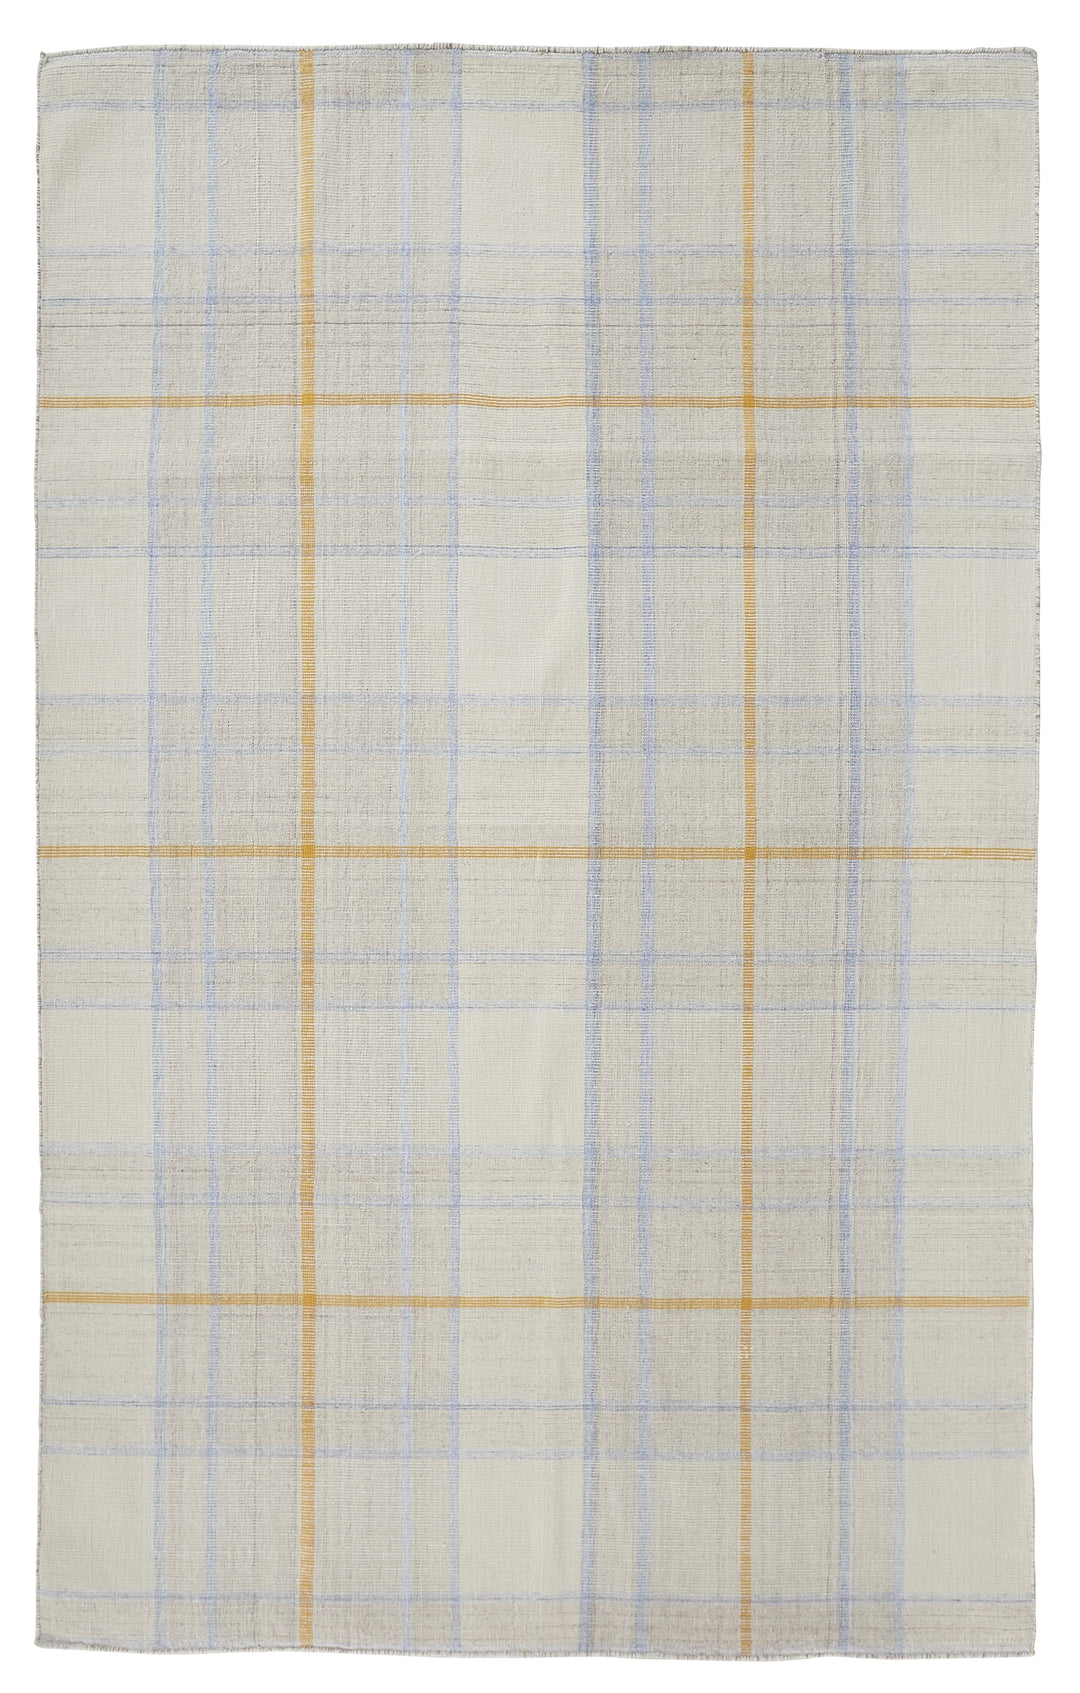 Feizy Feizy Jemma Soft Casual Plaid Handmade Rug Rug - Beige & Tangerine Orange - Available in 4 Sizes